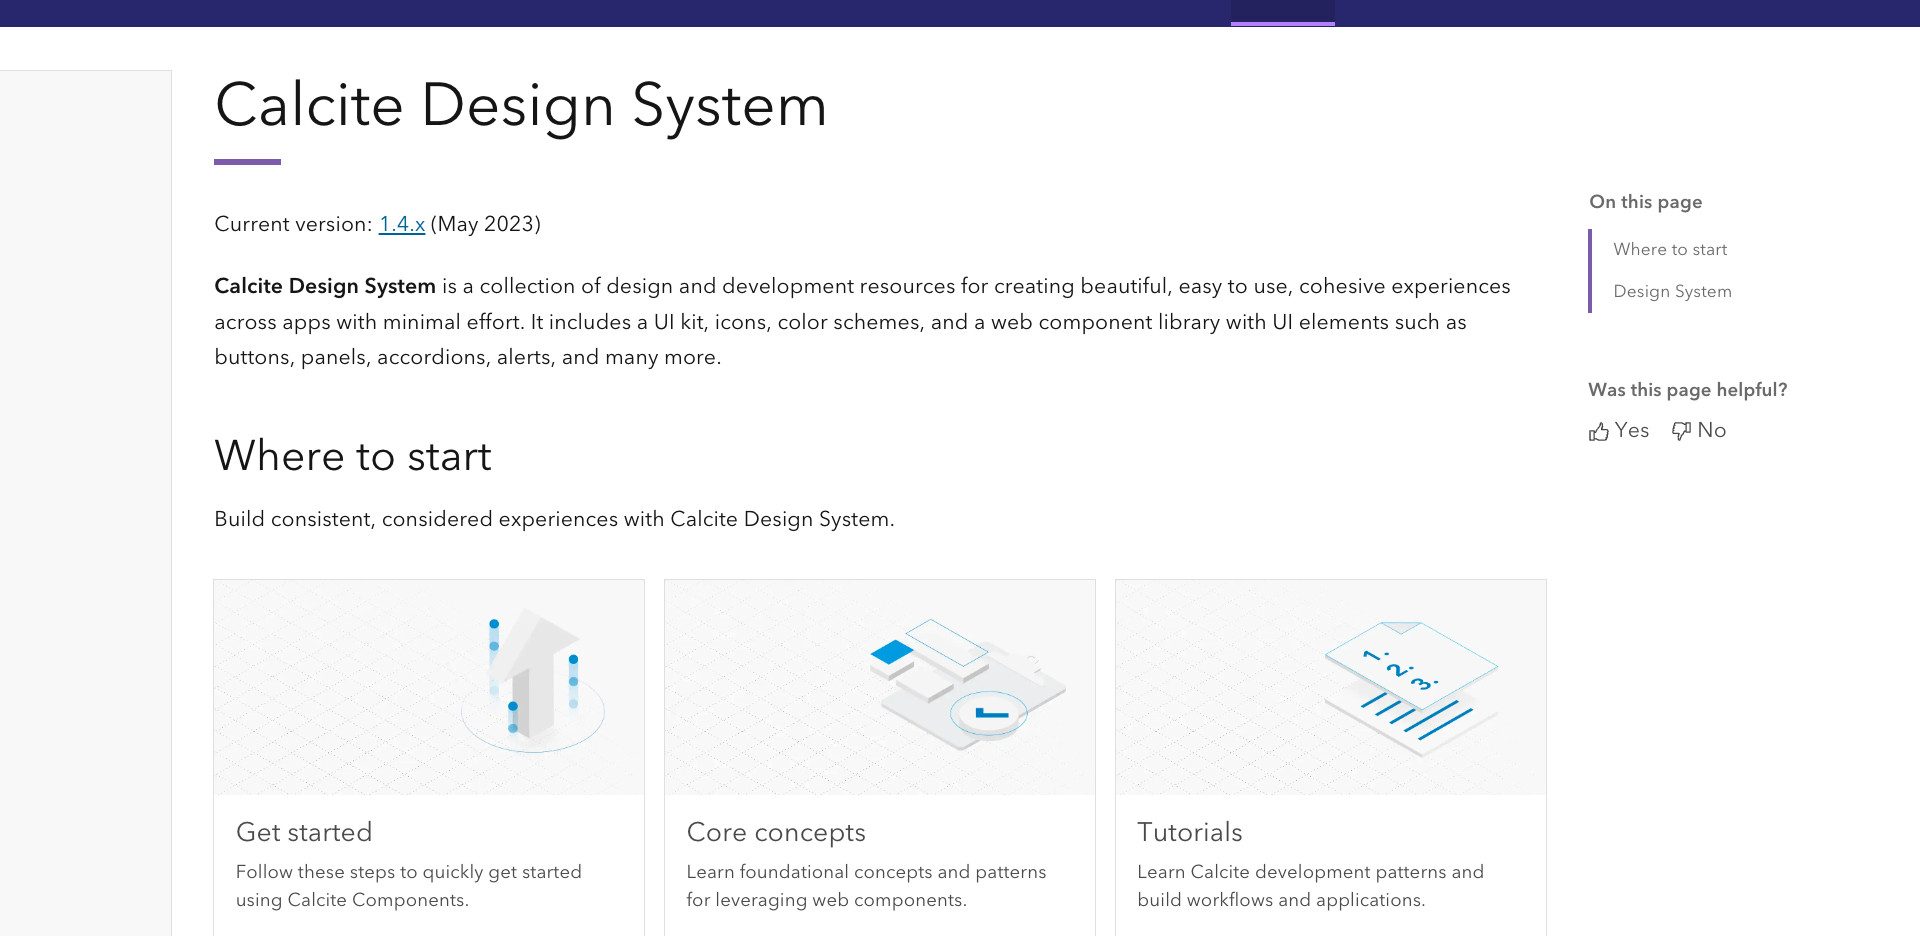 A screenshot of a website showing design system components